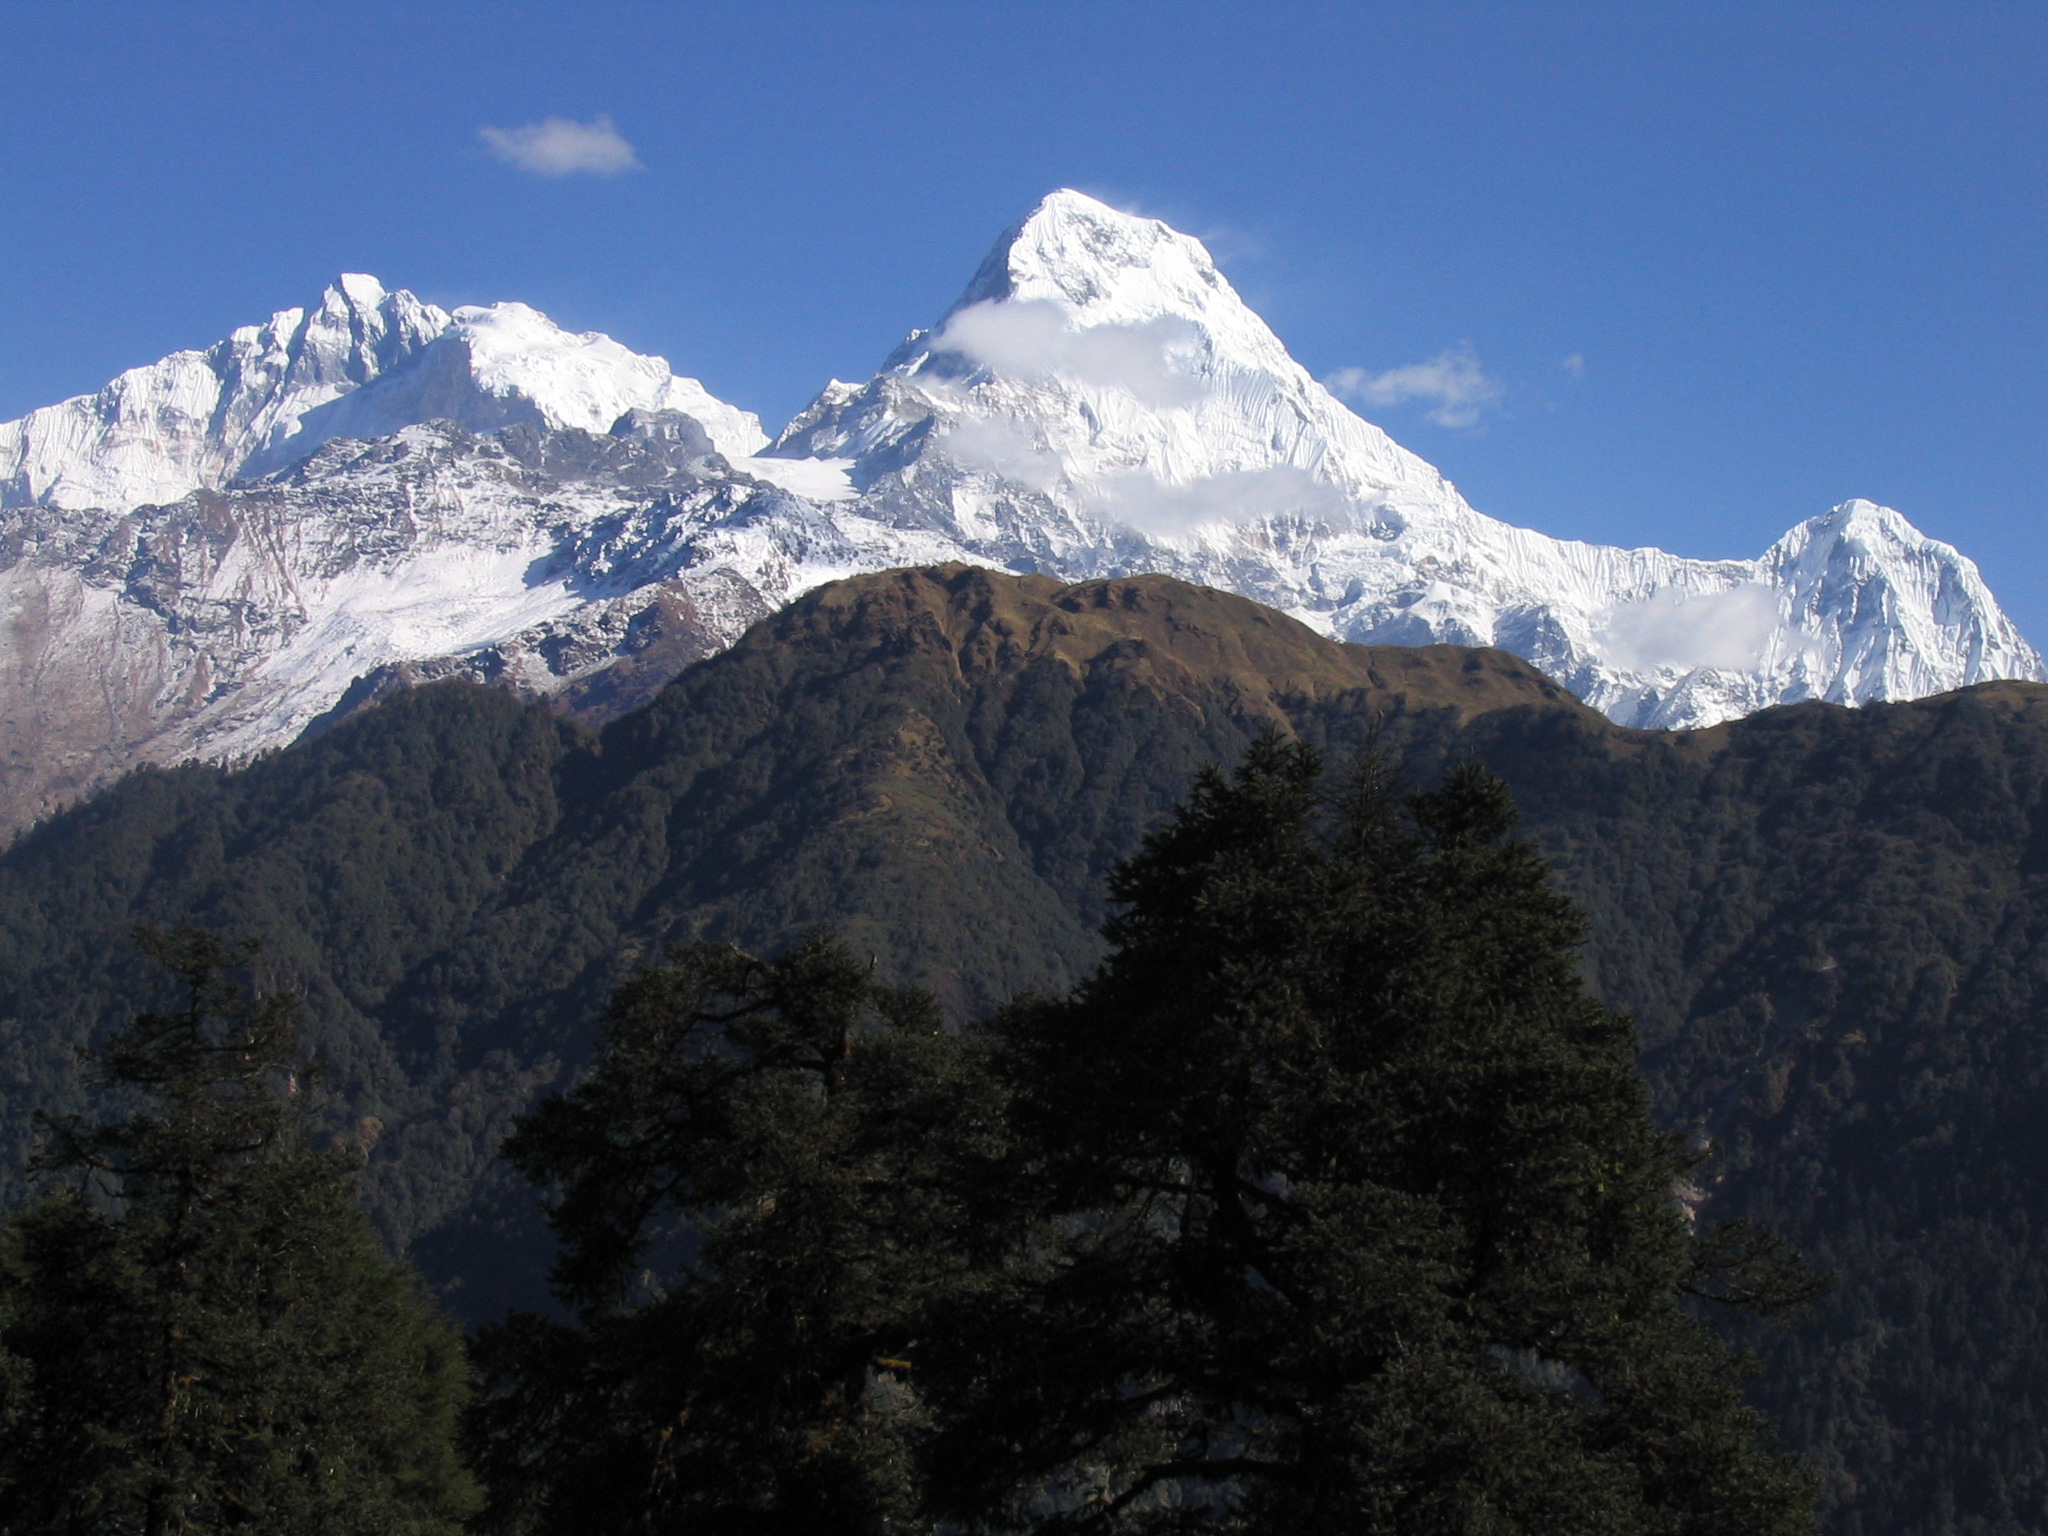 Annapurna (8091m) from Poon Hill